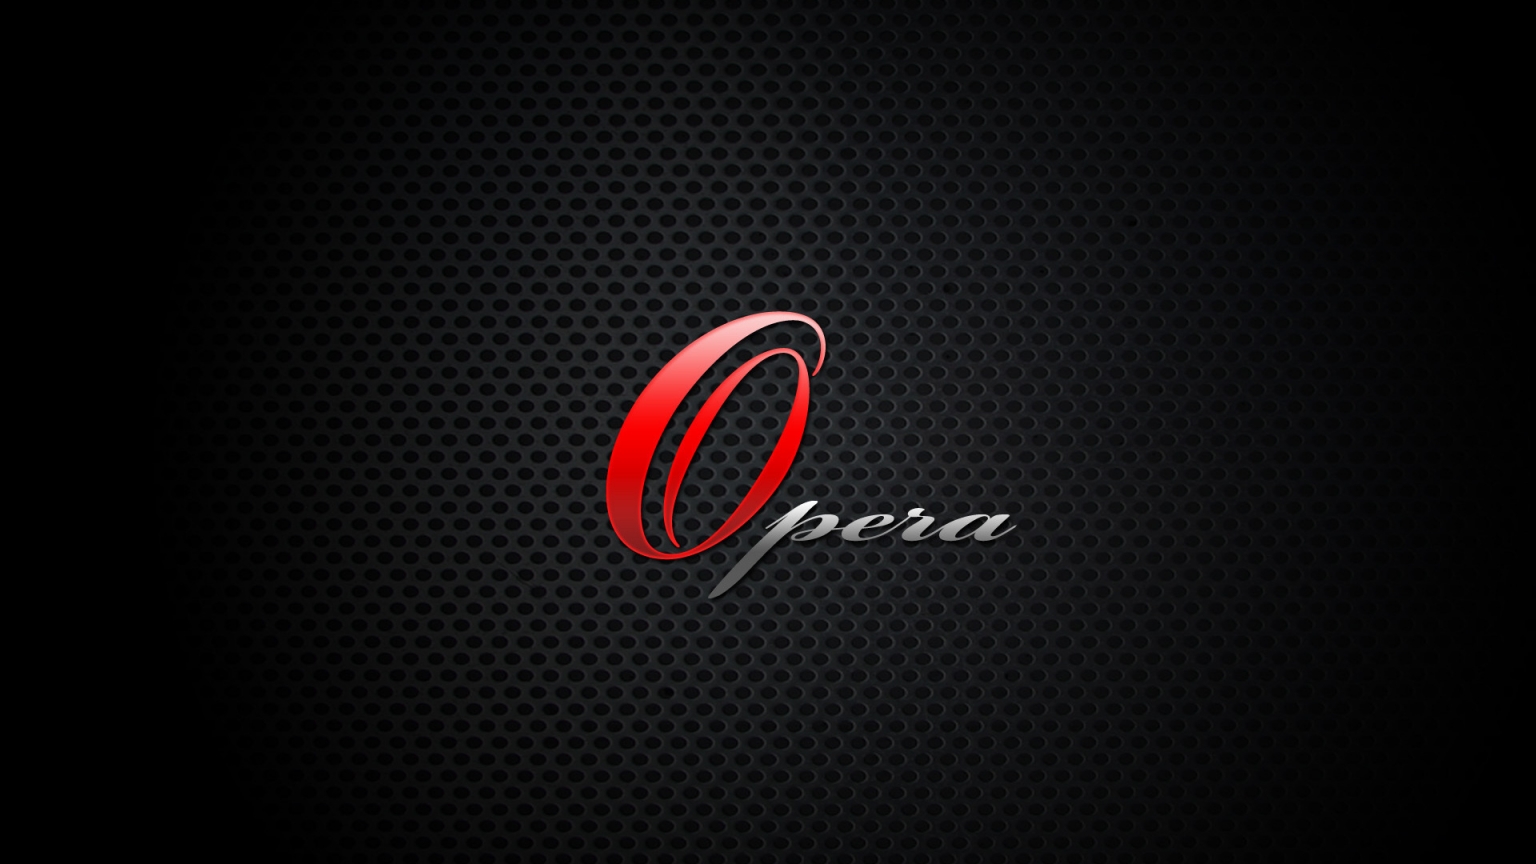 Opera Browser Tech for 1536 x 864 HDTV resolution